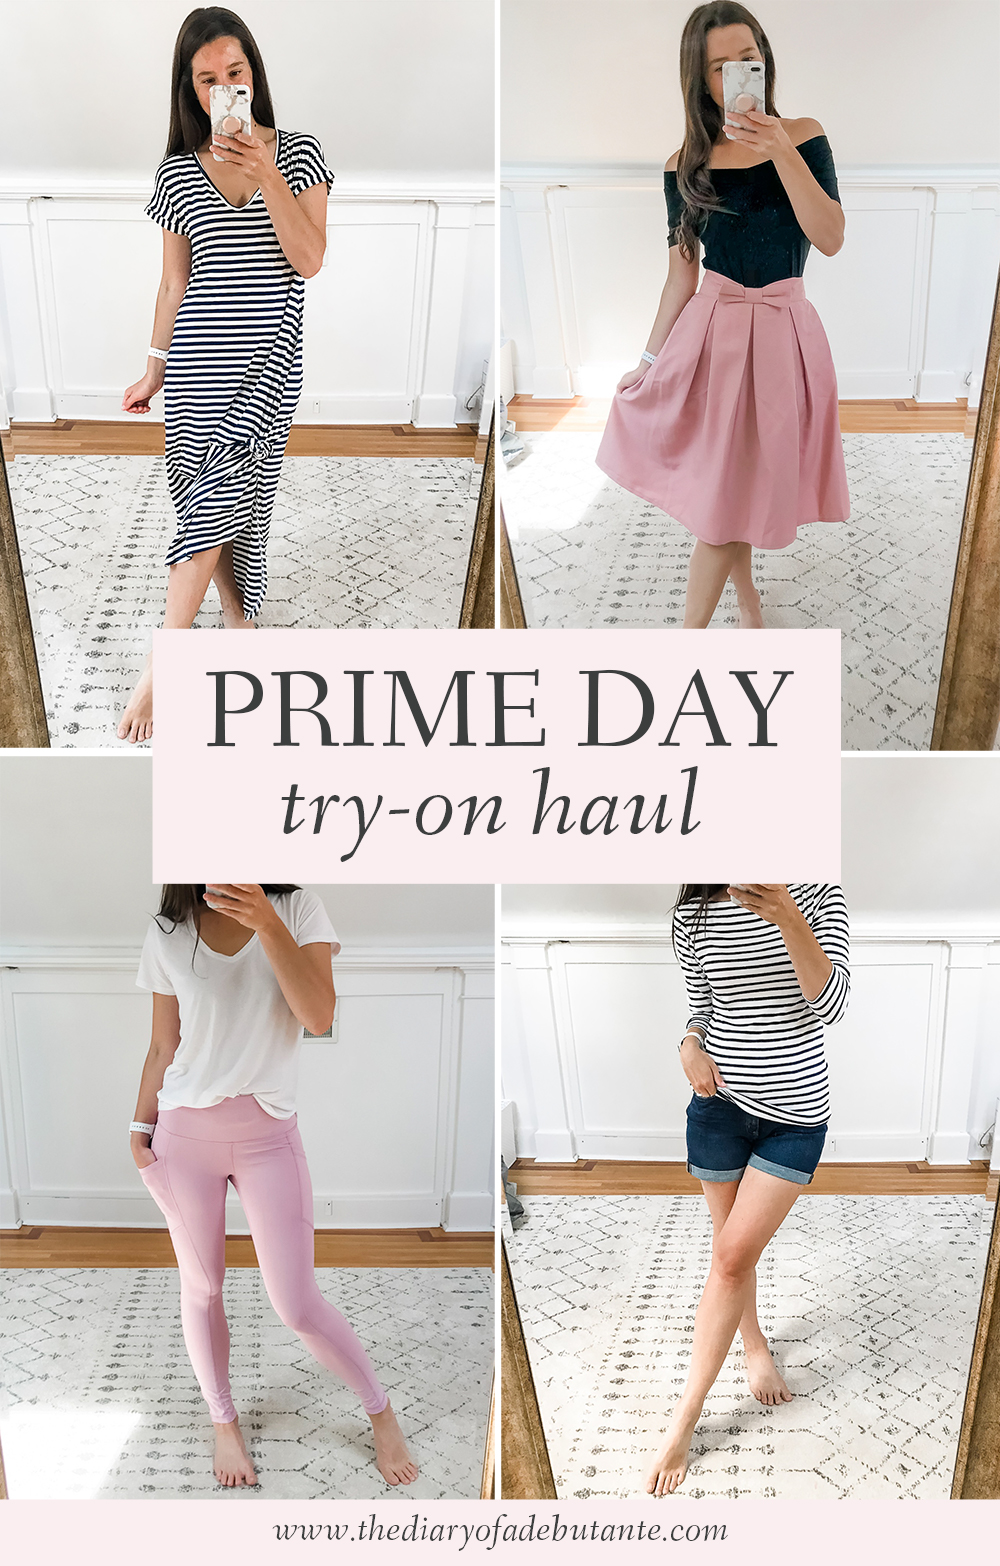 Amazon Prime Day Try-On Haul: Top Affordable Fashion Finds by popular affordable fashion blogger Stephanie Ziajka from Diary of a Debutante